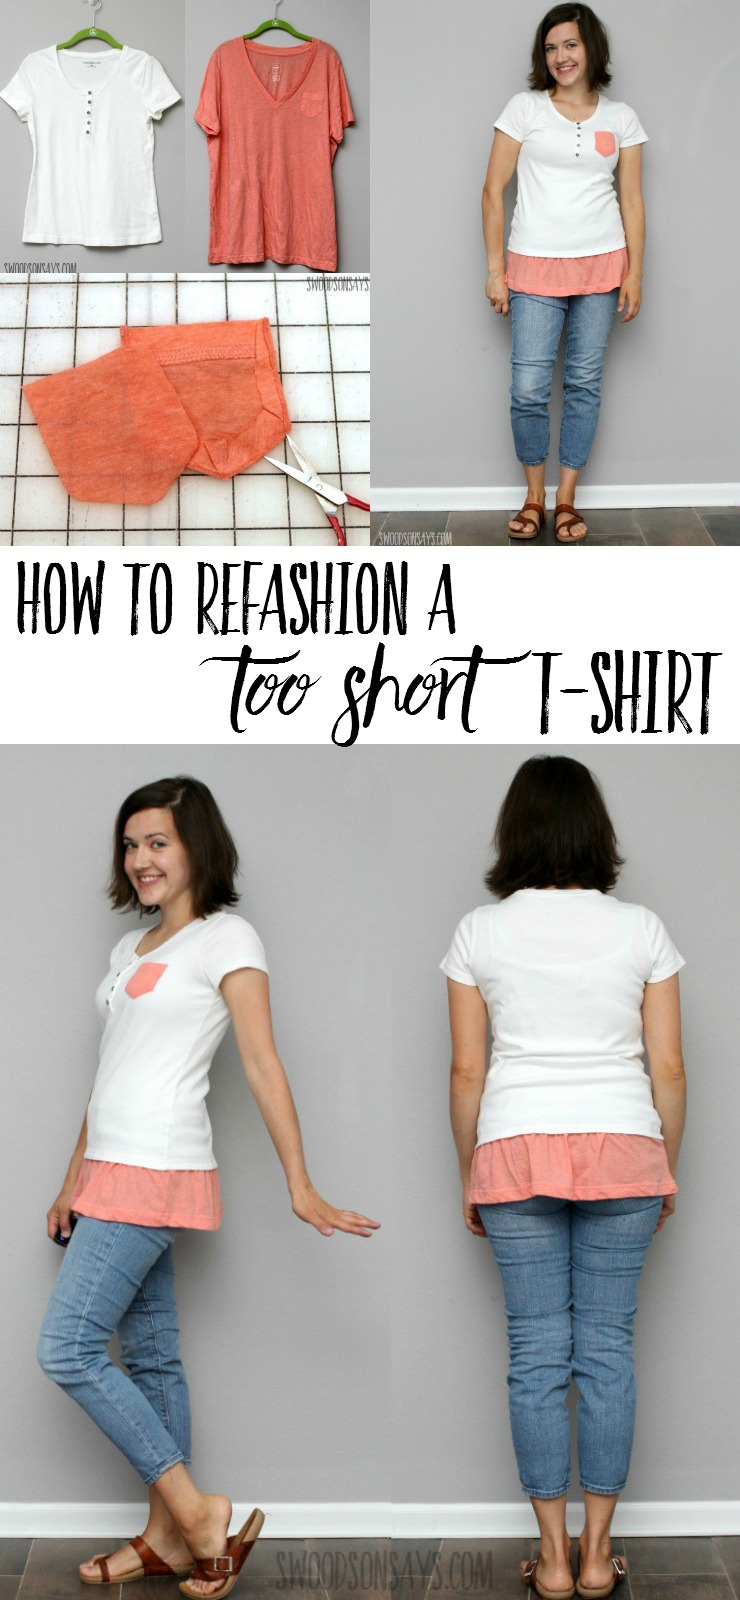 Check out how to fix up a t-shirt that's too short! This easy-to-match t-shirt fashion idea also creates a fresh look.